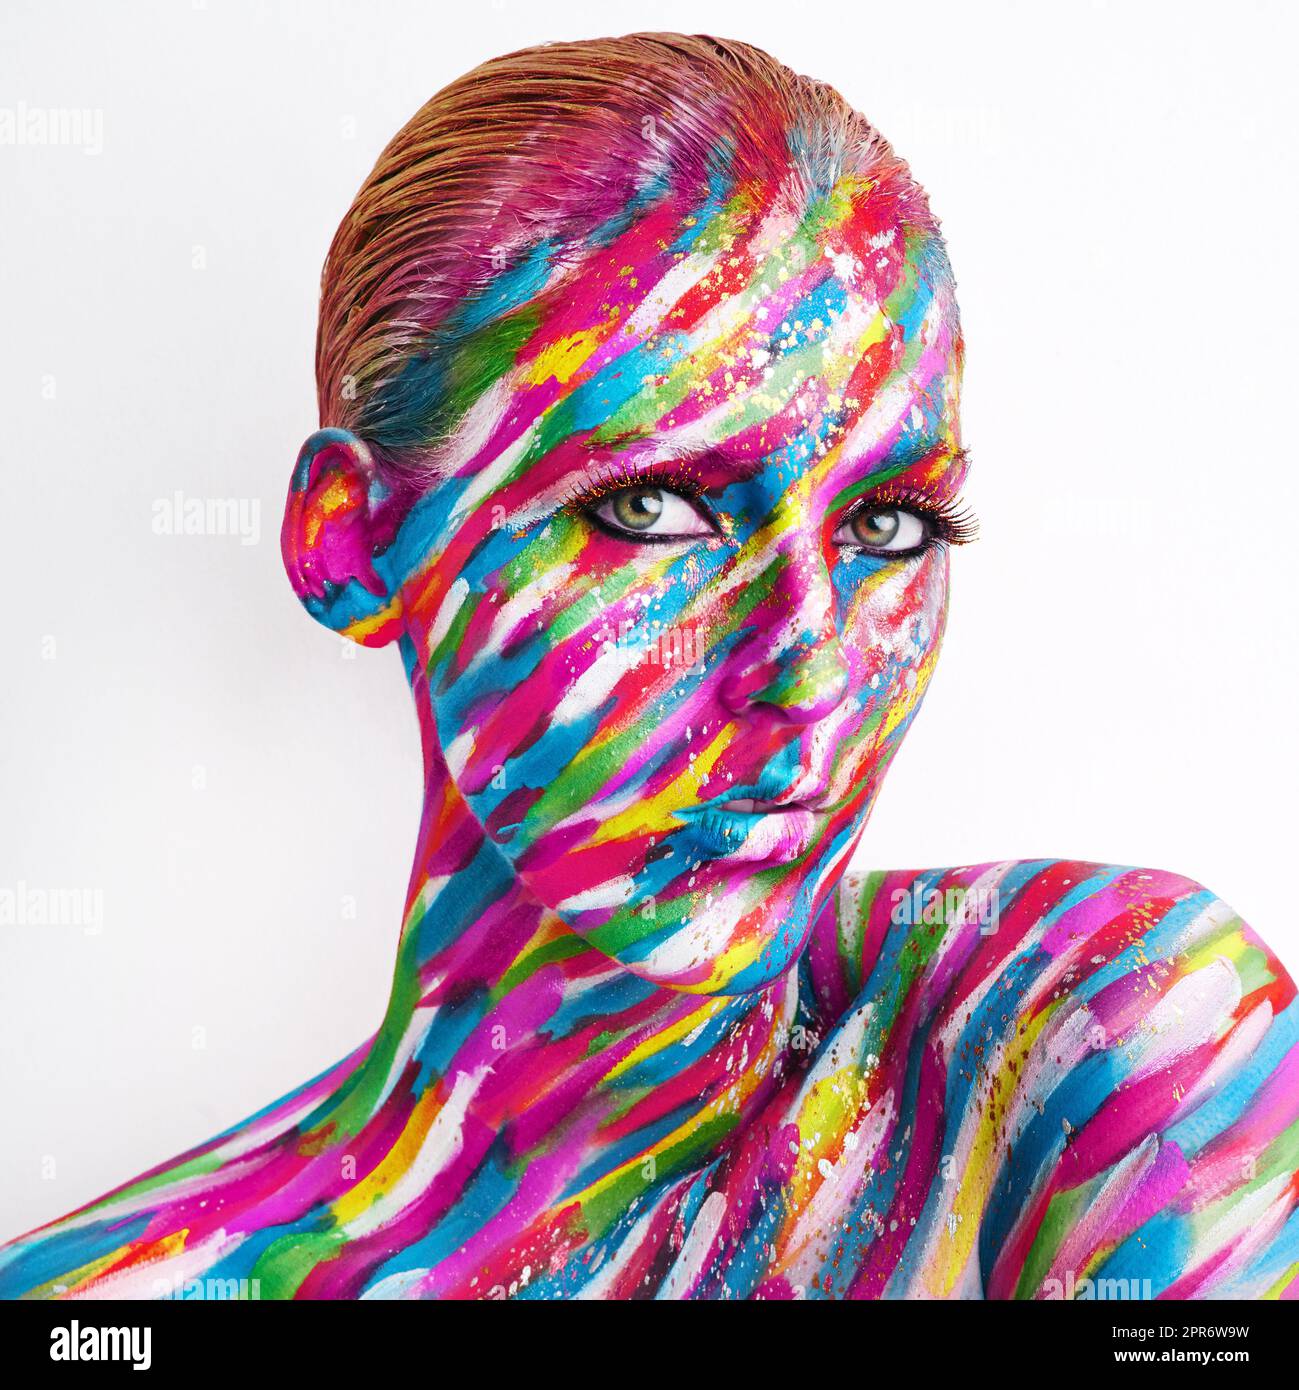 Theres art in beauty. Studio shot of a young woman posing with brightly colored paint on her face against a white background. Stock Photo